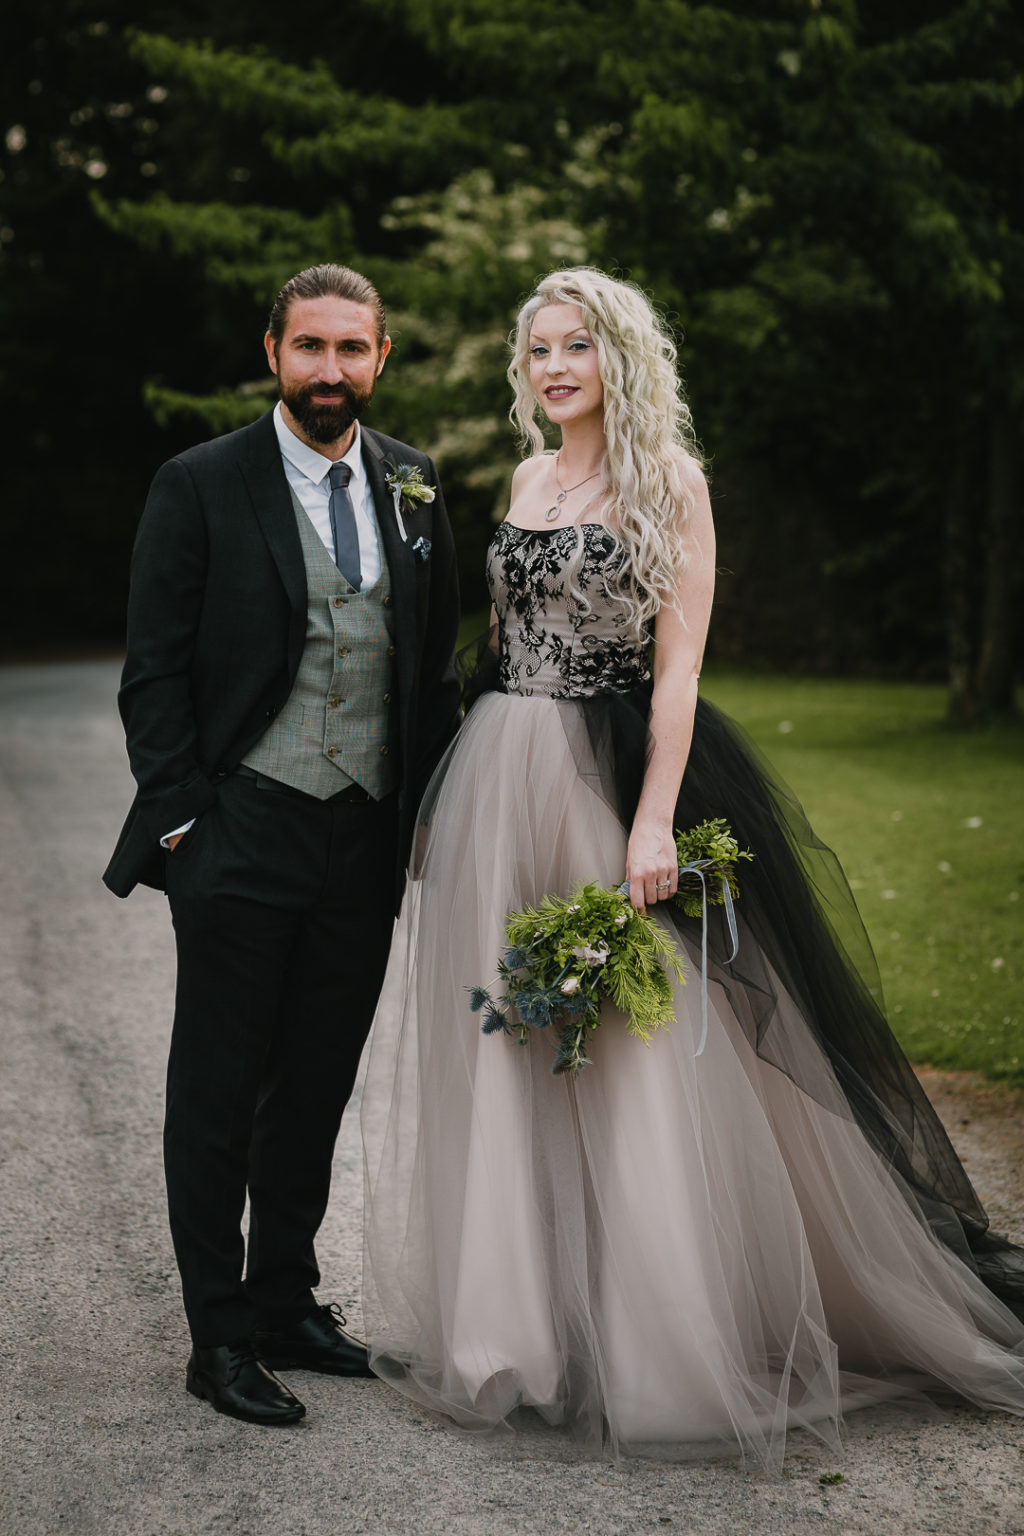 The bride was wearing a fantastic strapless A line black and white wedding dress with a lace bodice, and the groom was wearing a black suit, a grey waistcoat and a grey tie